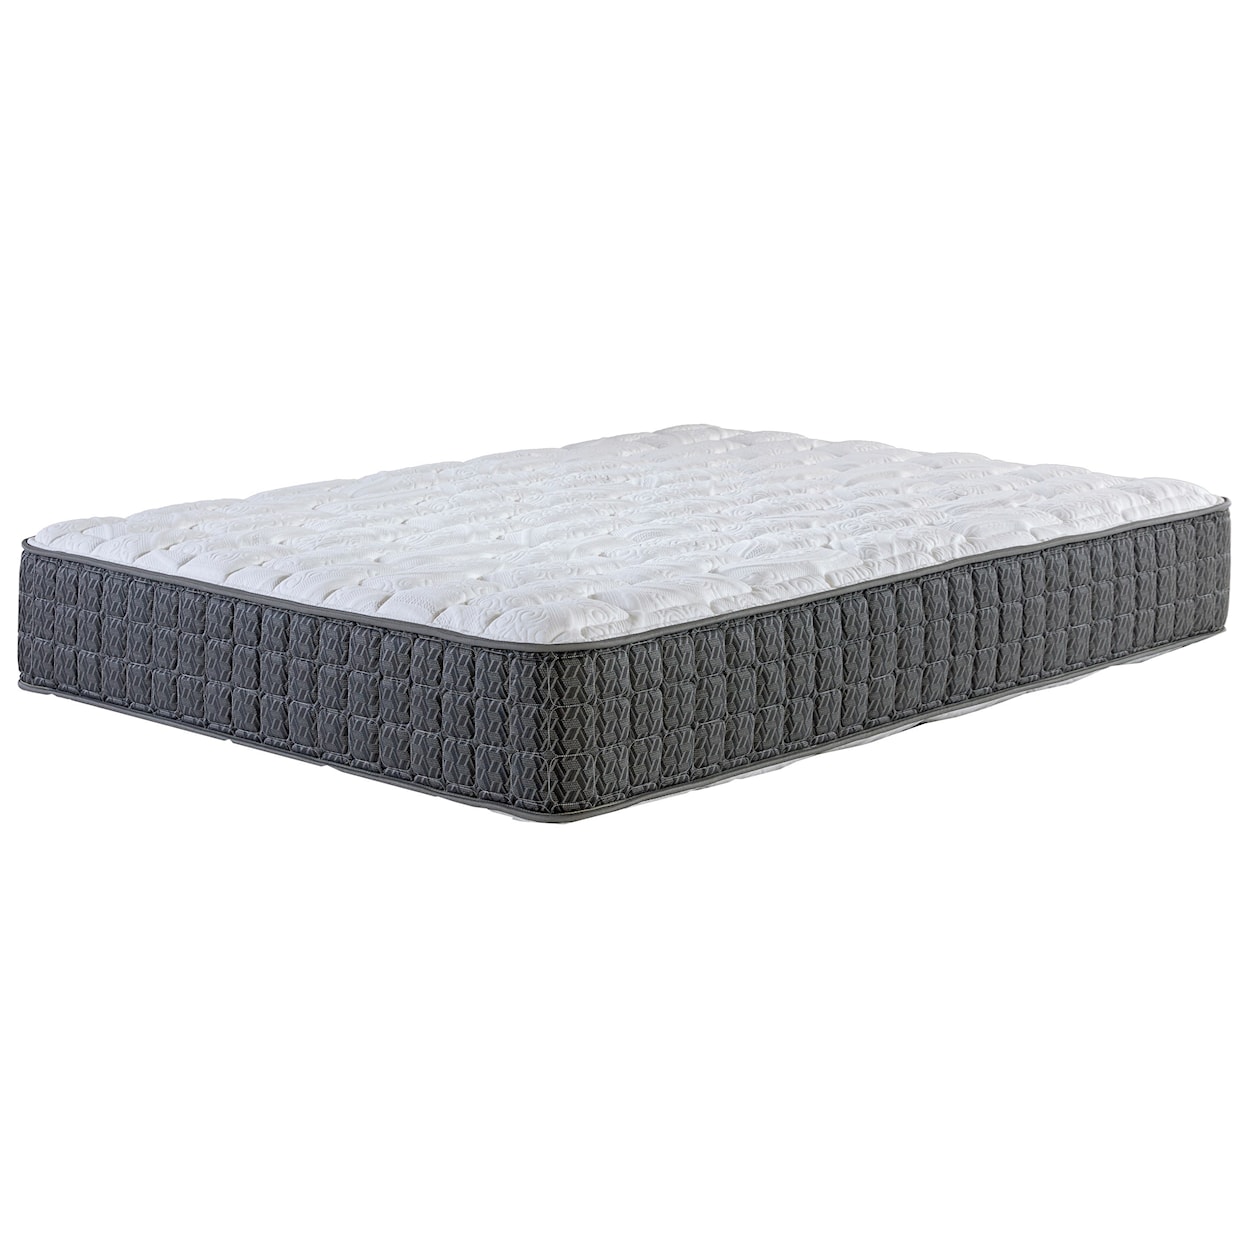 Corsicana Rossington Firm Twin XL Firm Two Sided Mattress